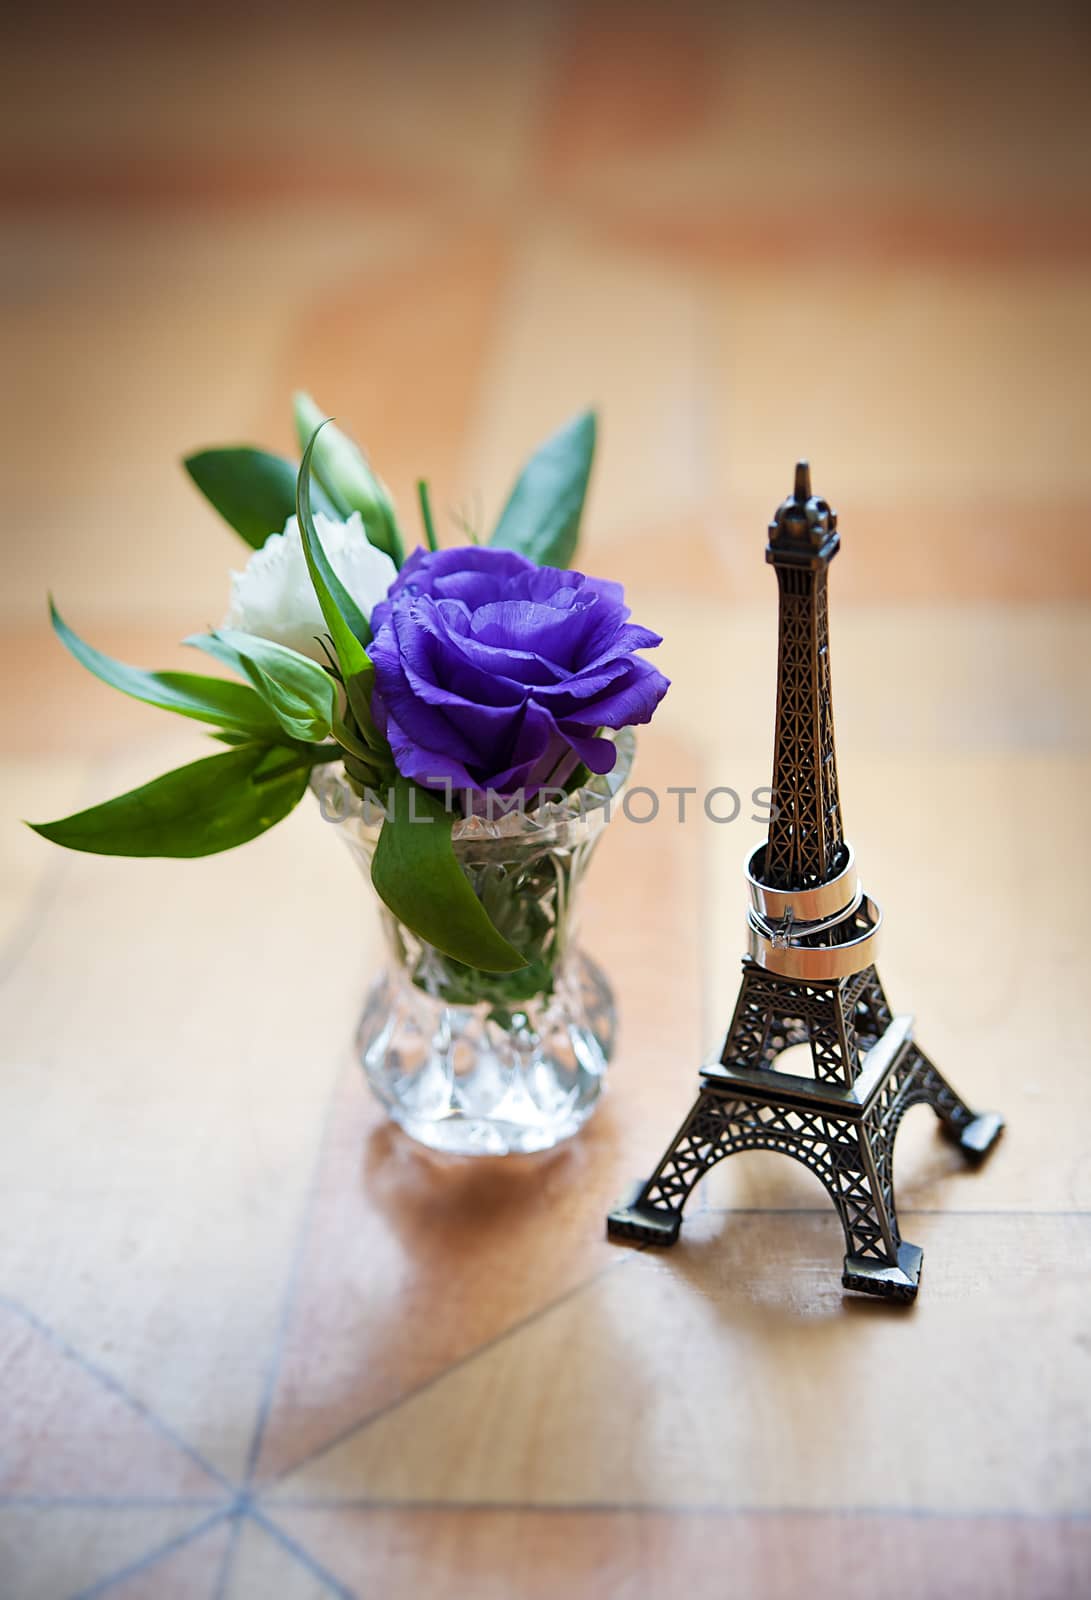 statuette of Eiffel Tower and wedding rings by sfinks